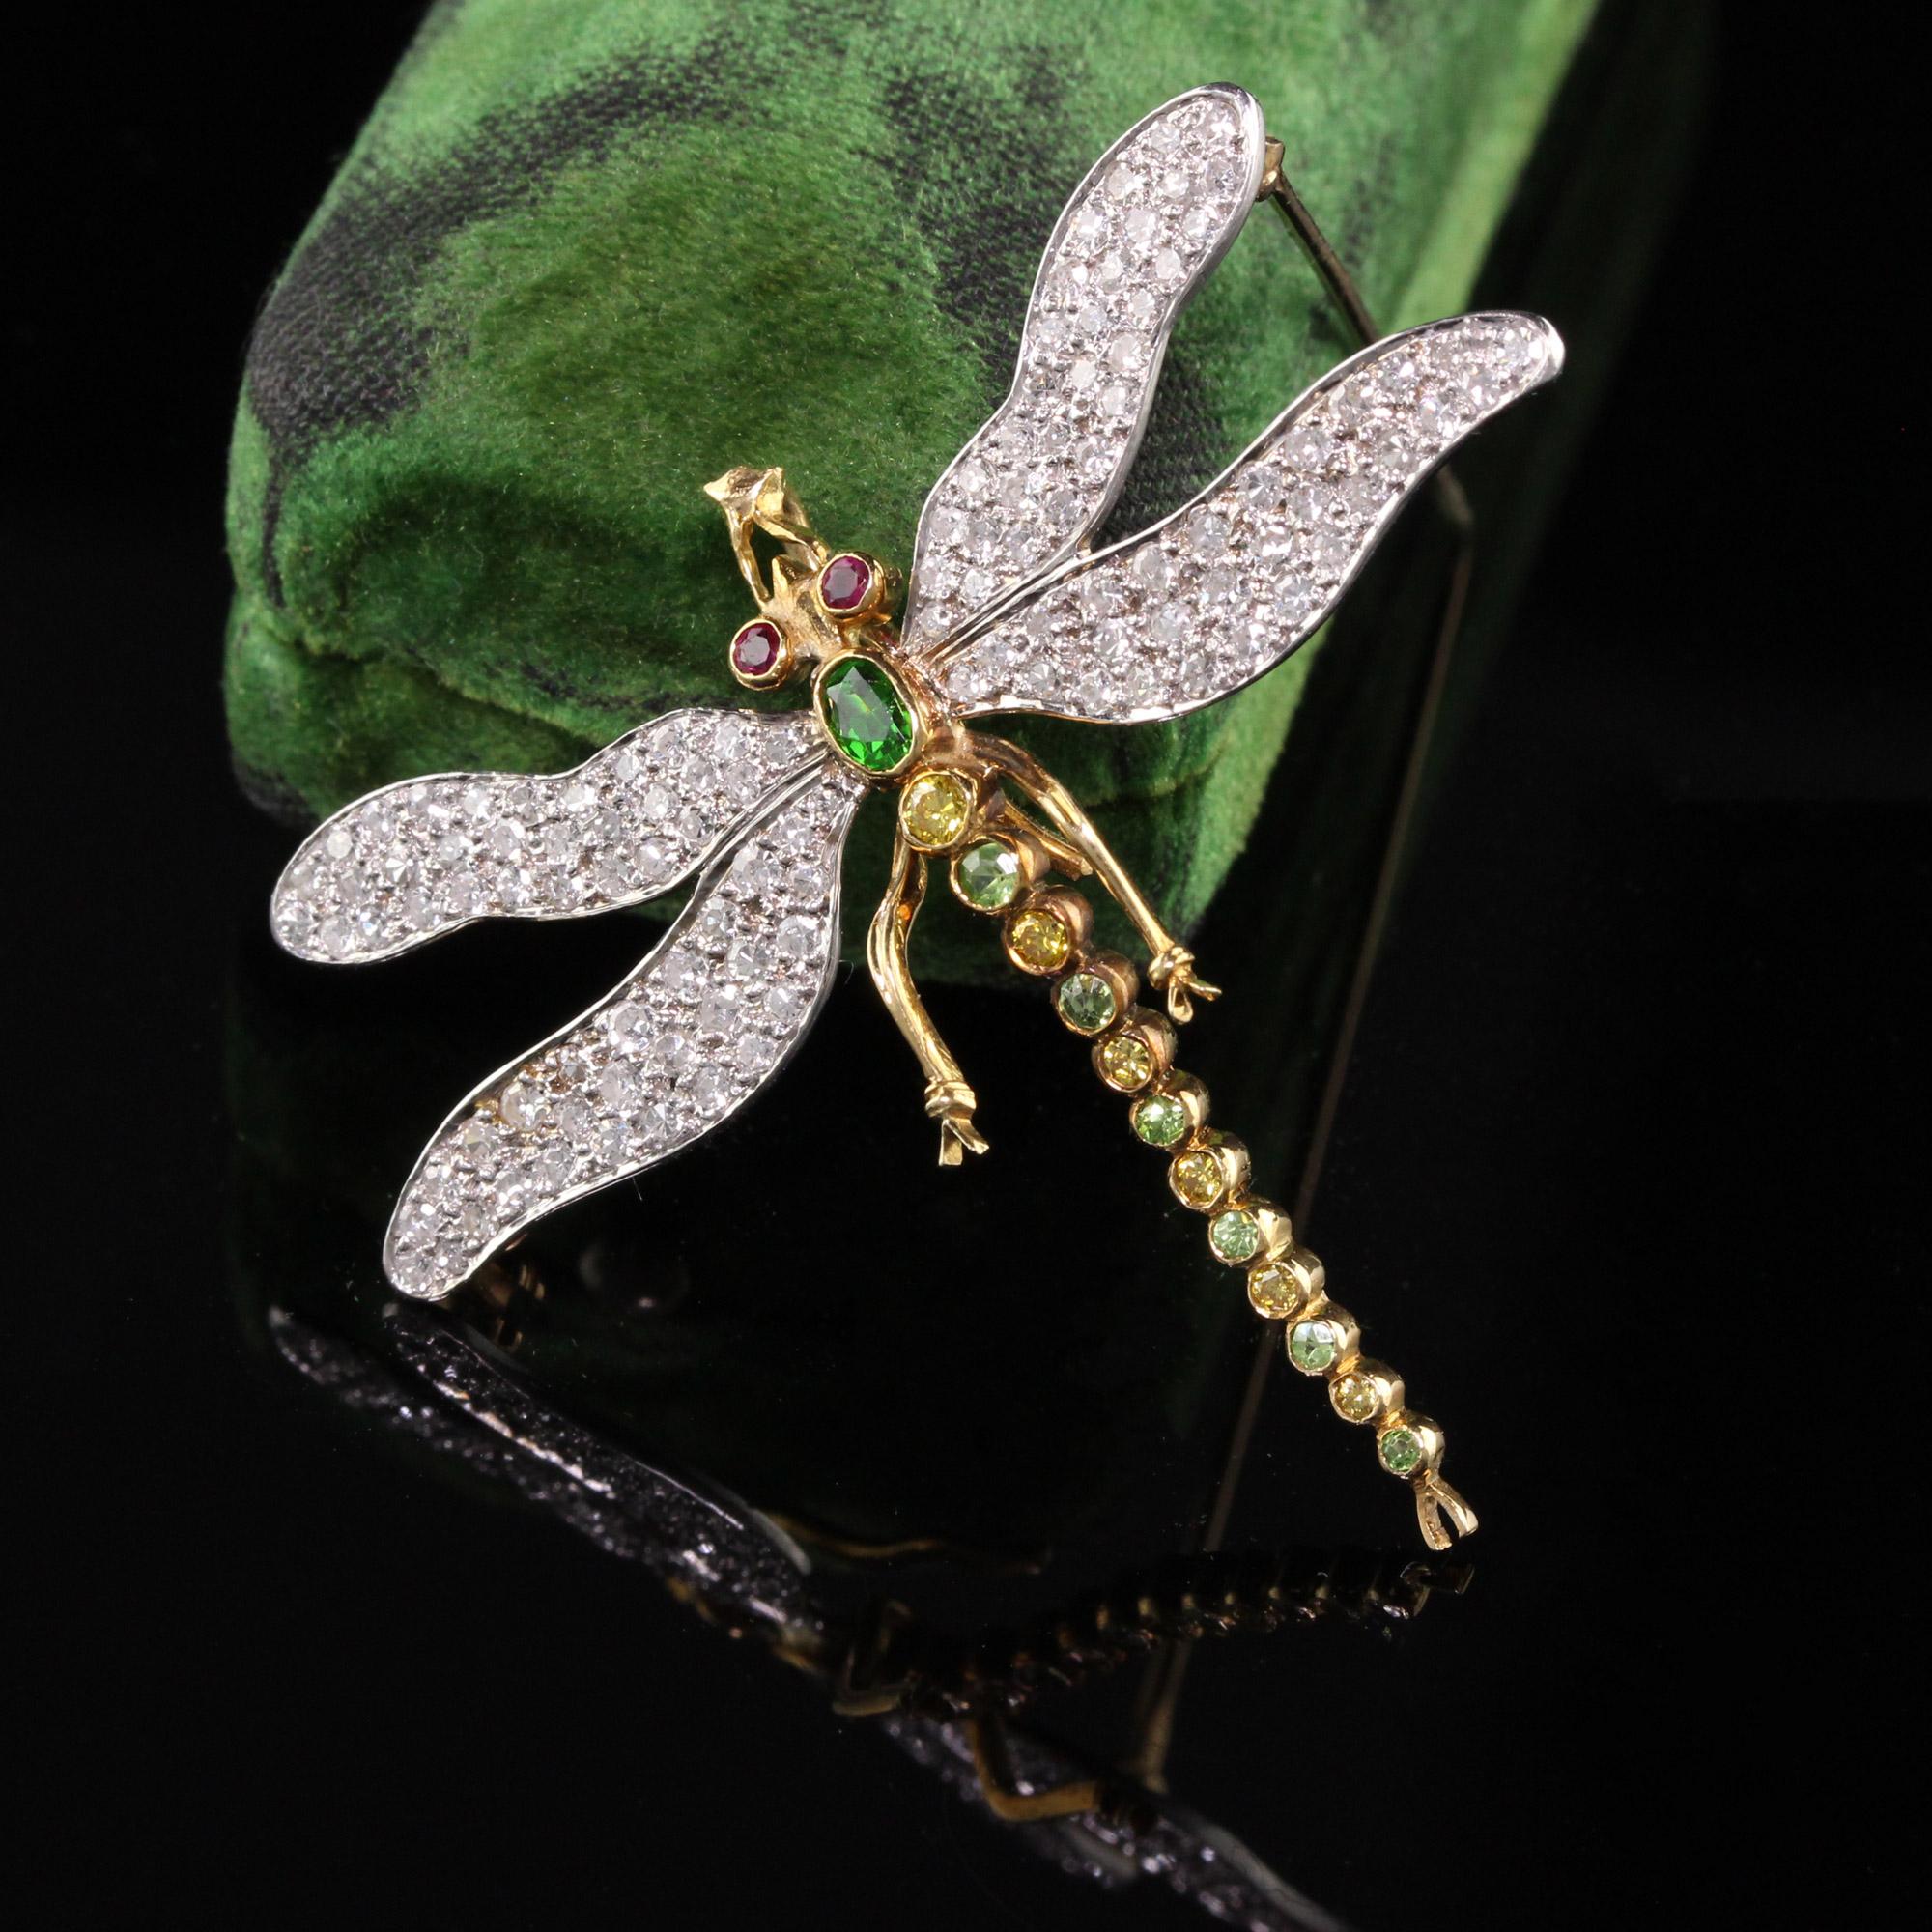 Gorgeous Vintage 18K Yellow Gold Platinum Diamond and Demantoid Garnet Dragonfly Pin. This fabulous dragonfly pin has single cut diamonds all over its wings and a beautiful green Demantoid garnet on its head.

Item #P0118

Metal: 18K Yellow Gold and